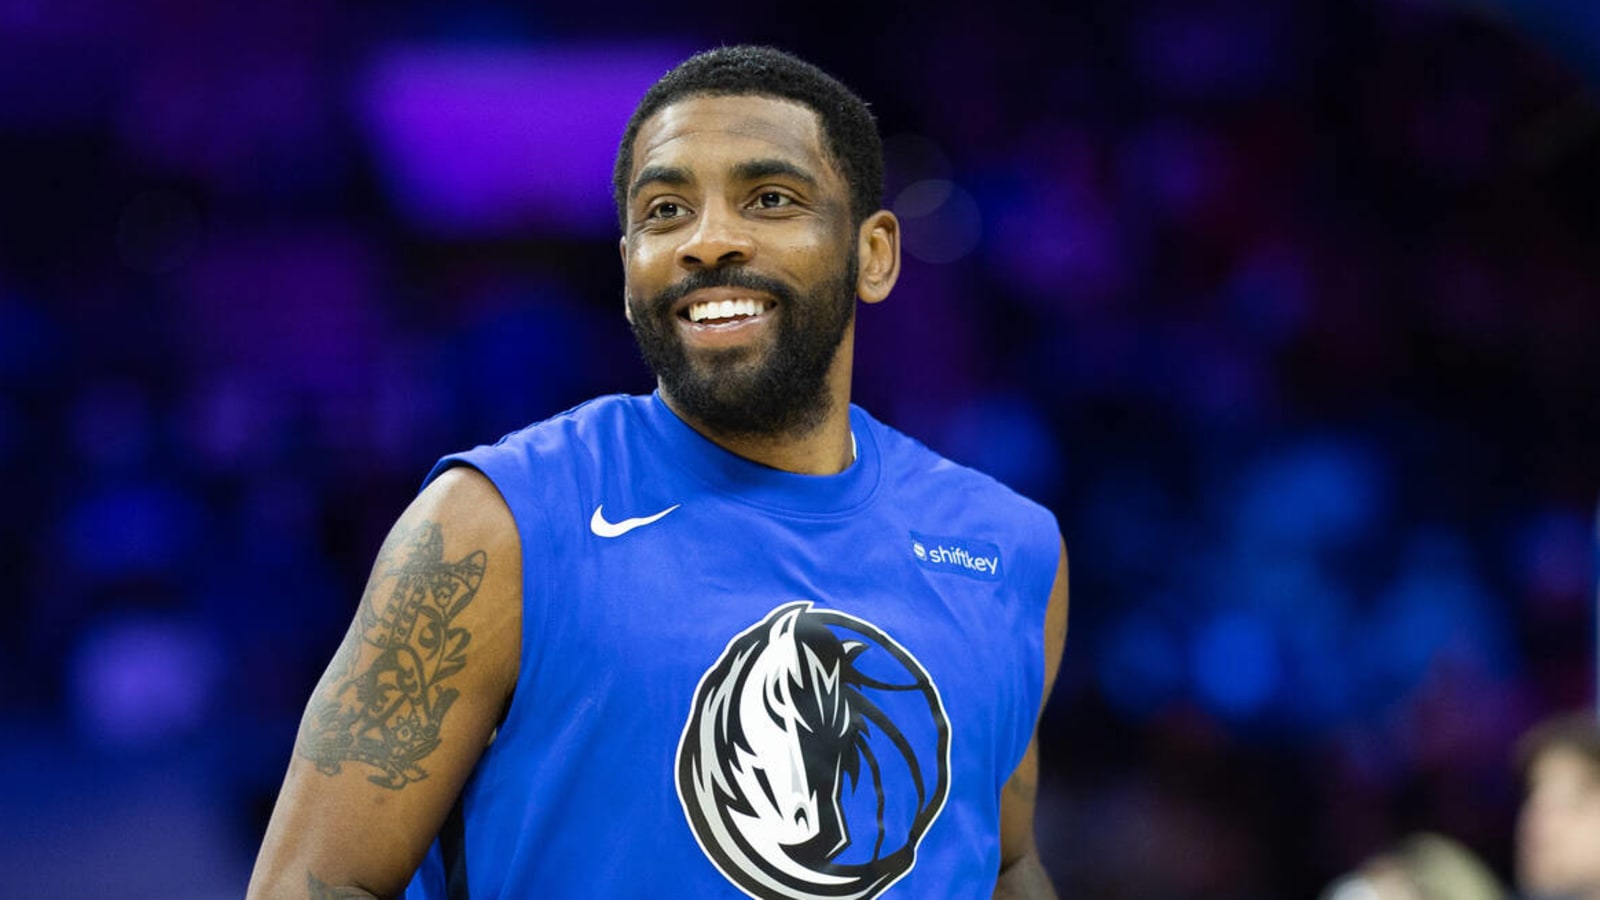 'Handshake deal' for Kyrie Irving in Dallas?